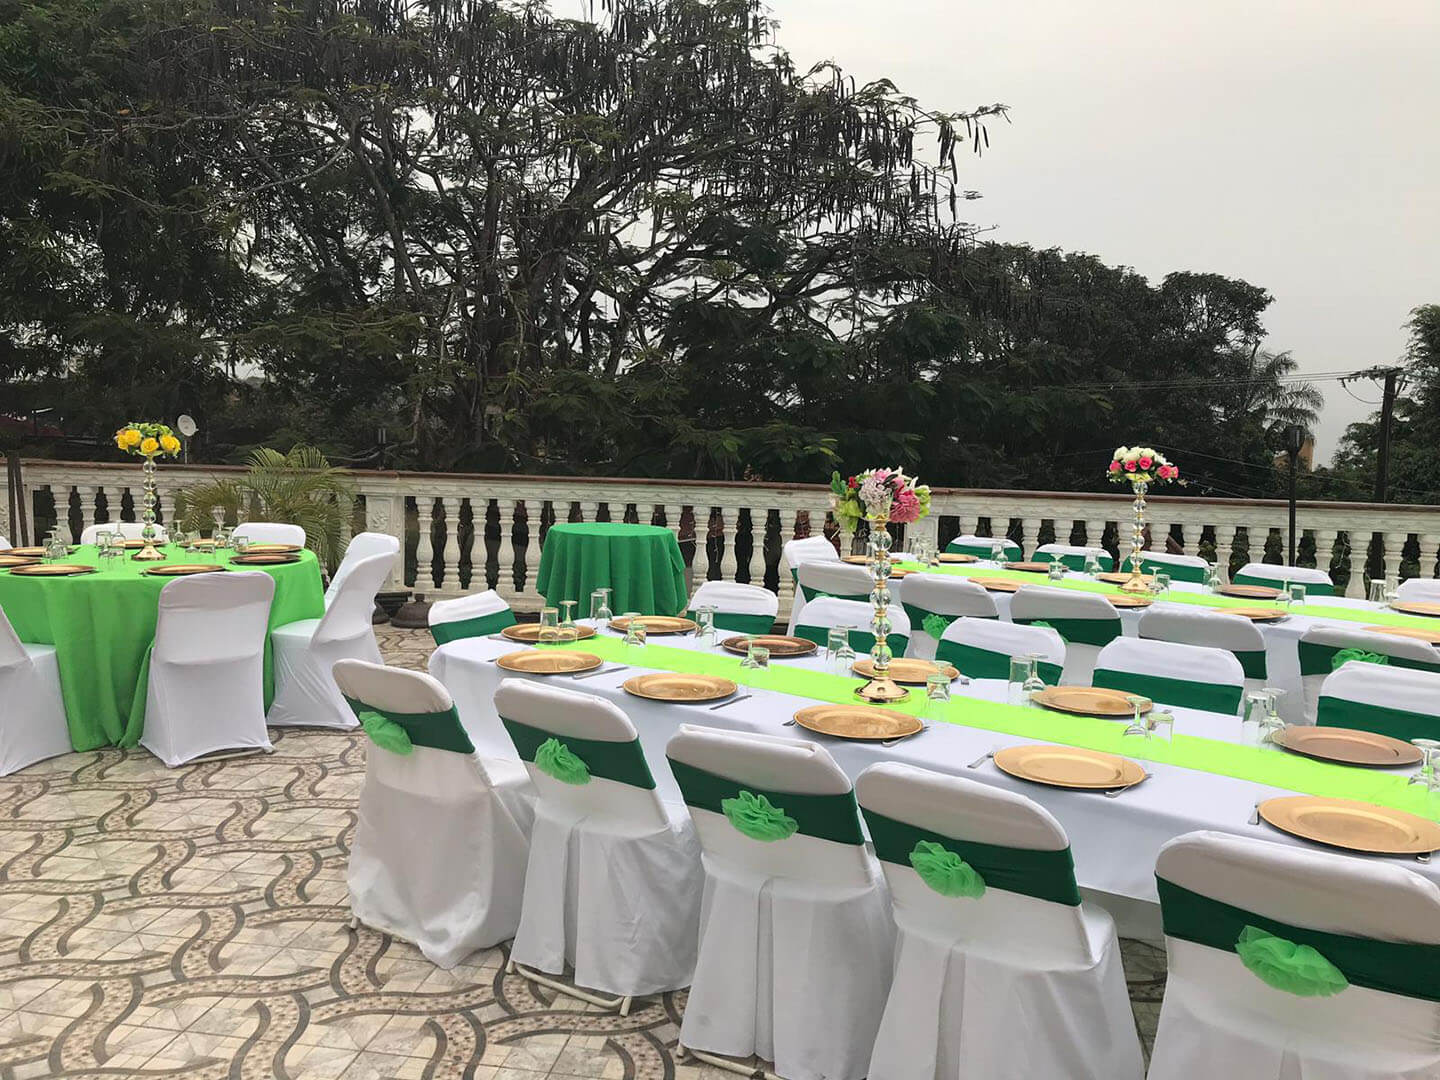 Terrace seating decorated for an event